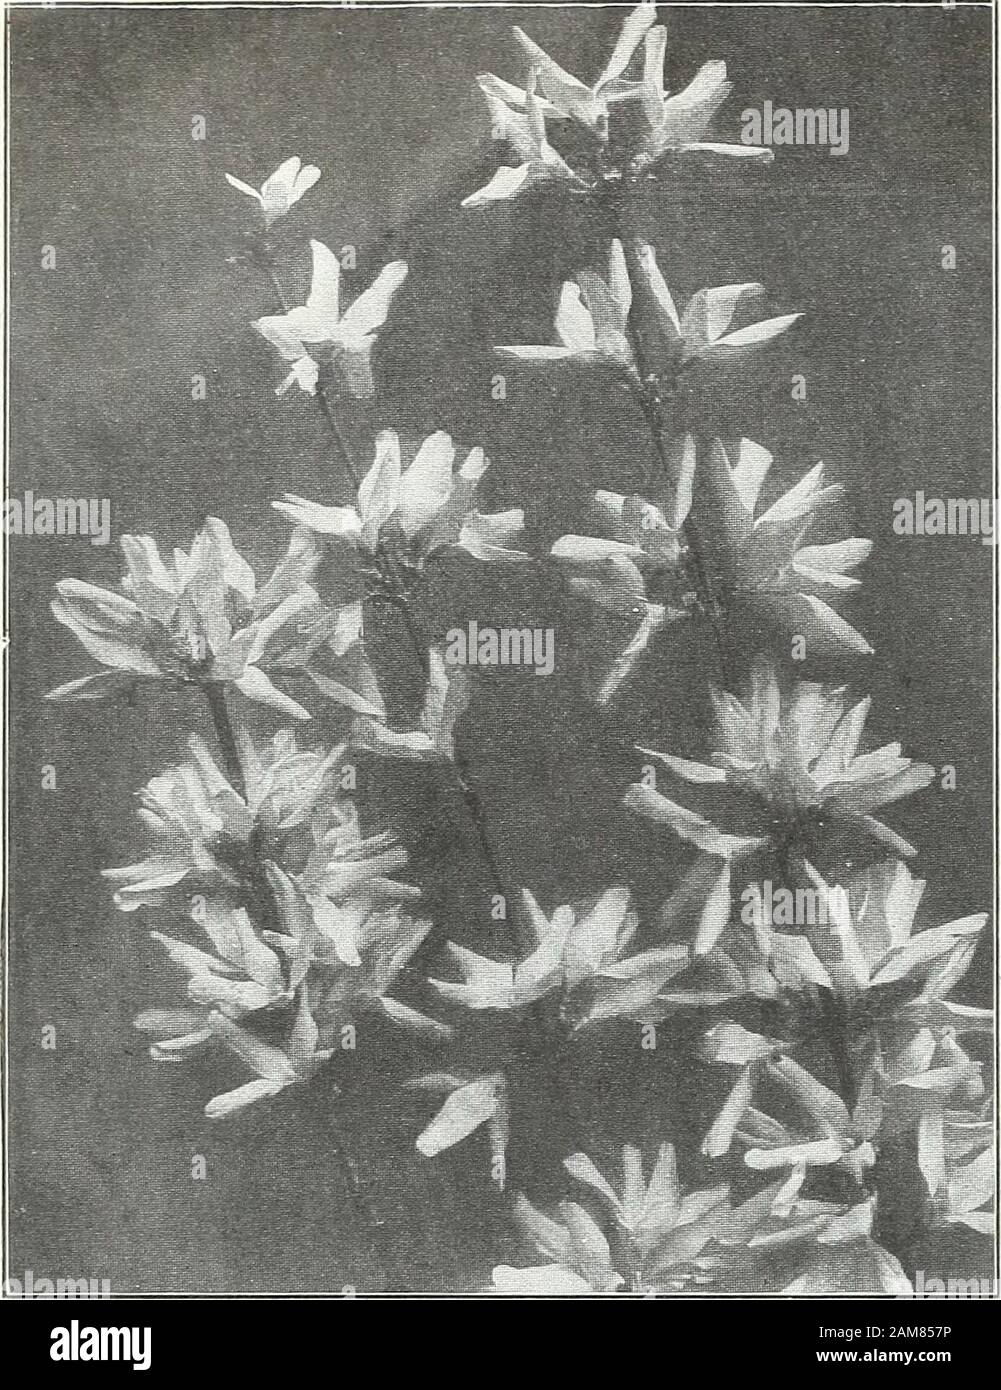 Farquhar's garden annual : 1922 . each; $10.00 per doz. EXOCHORDA Giraldii Wilsonii. This new Pearl Bush is the hand-somest of the family. It forms a large bush or small tree and inSpring is covered with racemes of pure white flowers which are largerthan those of the well-known type. This new jjlant is absolutelyhardy and is one of the most notable acquisitions from China inrecent years. $2.50 each. EUONYMUS radicans acutus. This new variety forms an exceed-ingly dense mat of deepest green, glossy, neat, arrow-shaped foliage.It is perhaps the finest of the species for use as a ground cover, ha Stock Photo